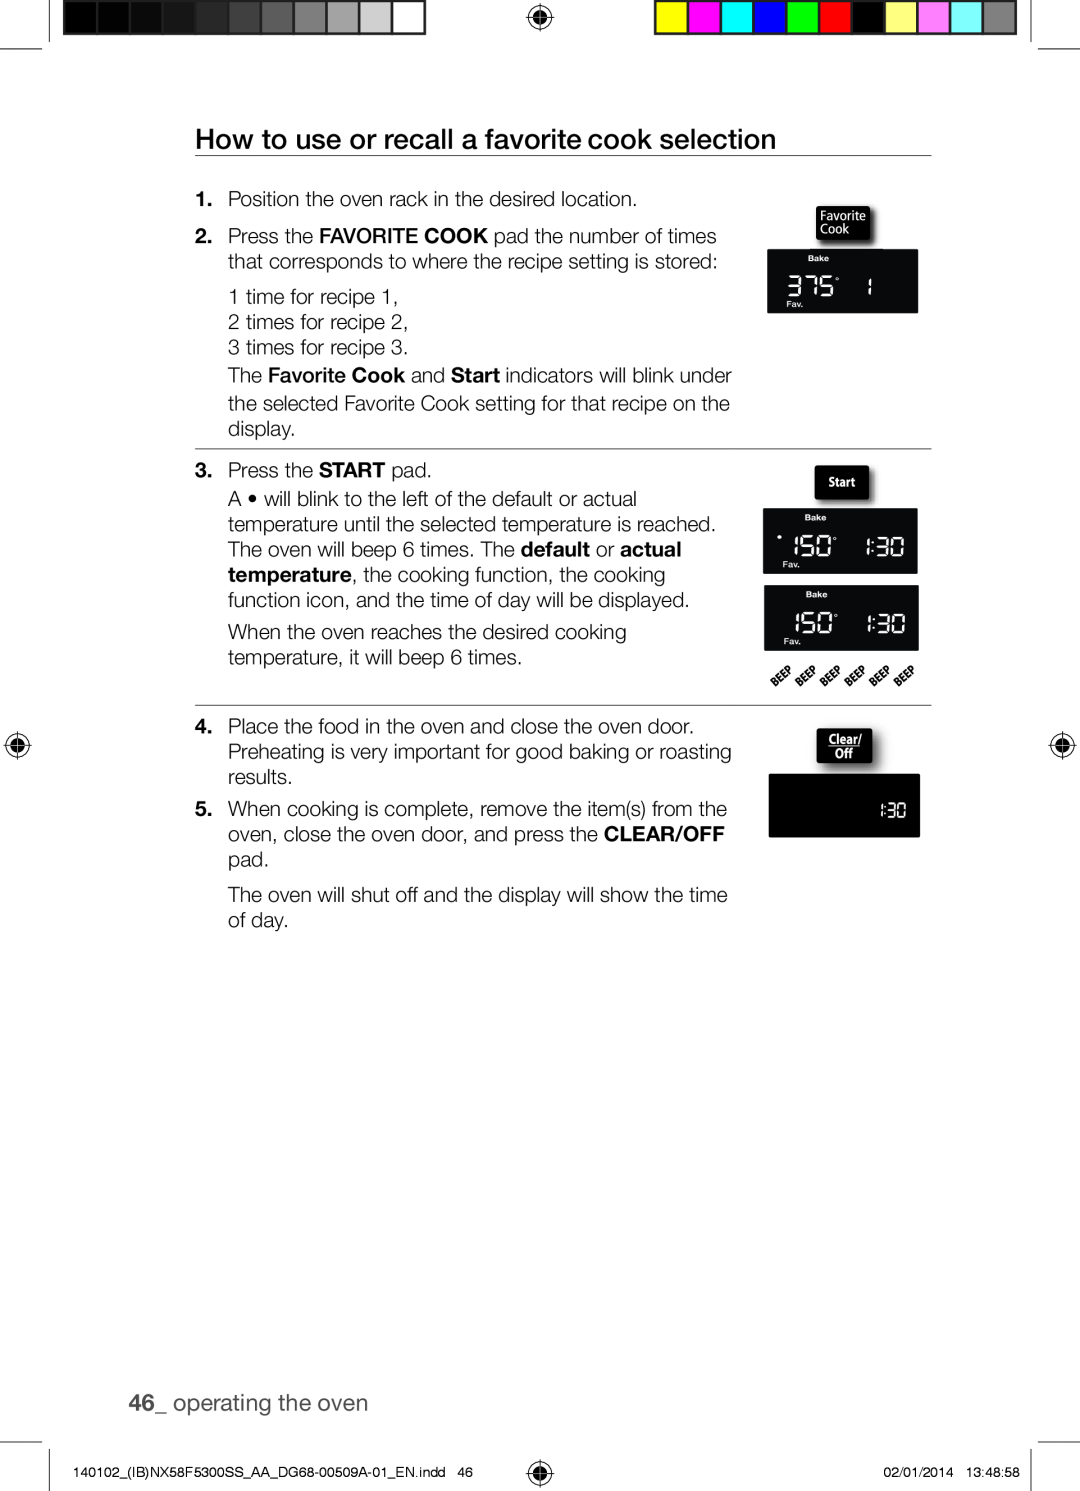 Samsung NX58F5500SW user manual How to use or recall a favorite cook selection, operating the oven 